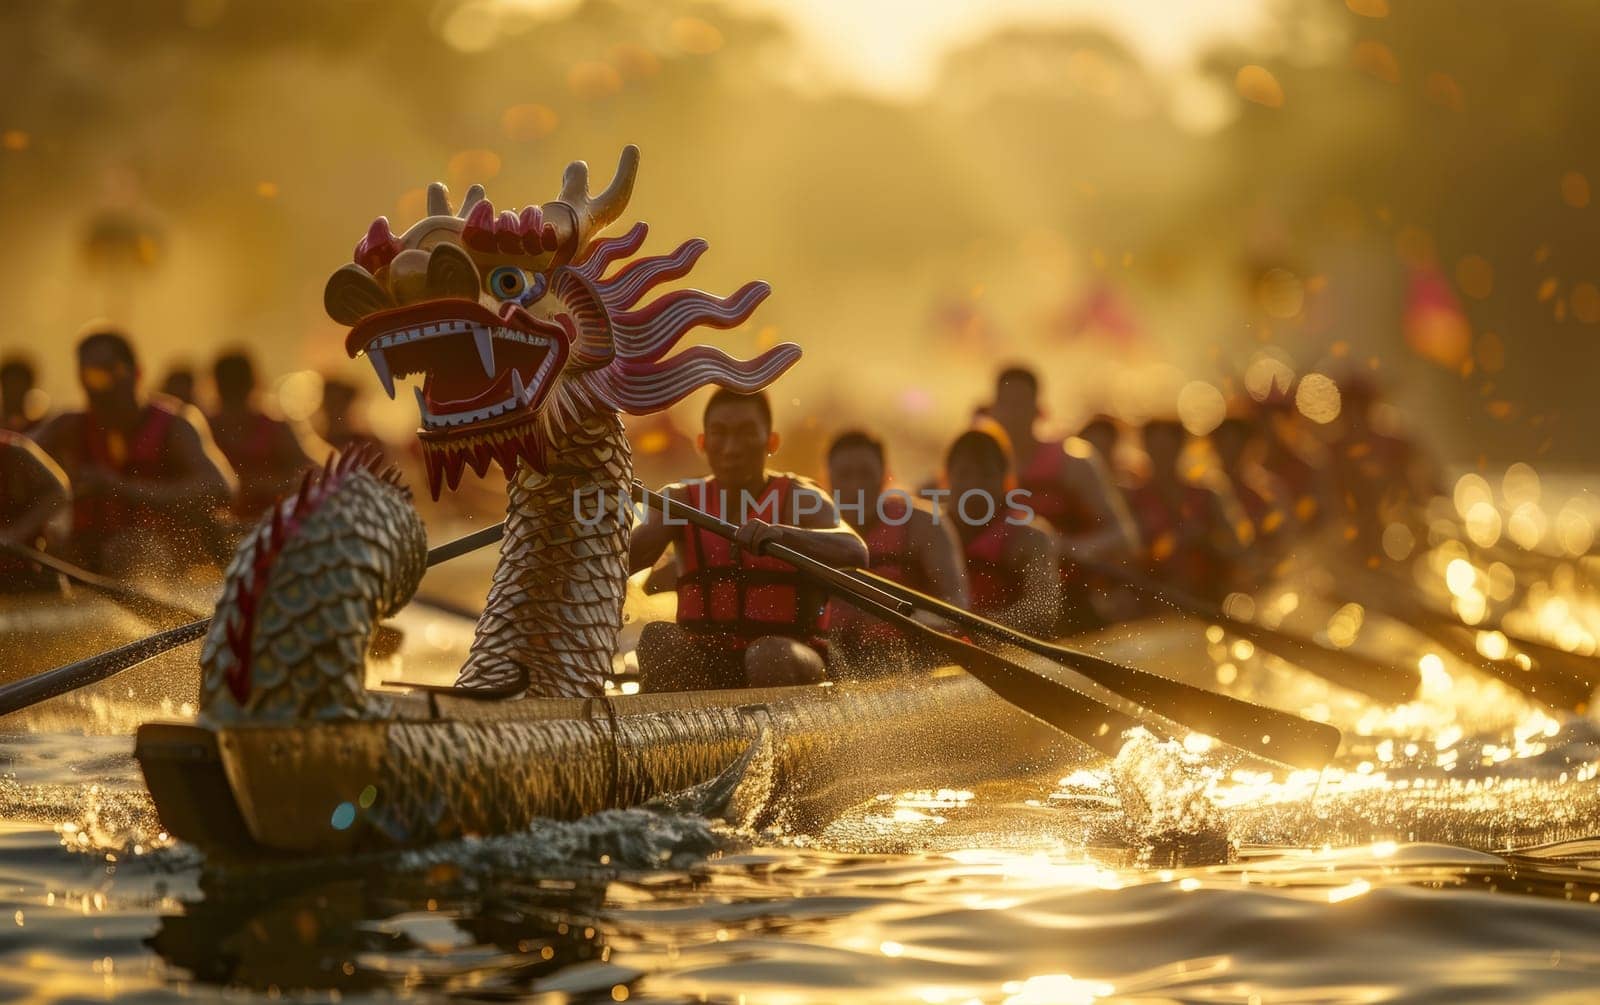 The golden hour illuminates a dragon boat race, with rowers in sync and water sparkling, capturing the spirit of this vibrant cultural event. by sfinks